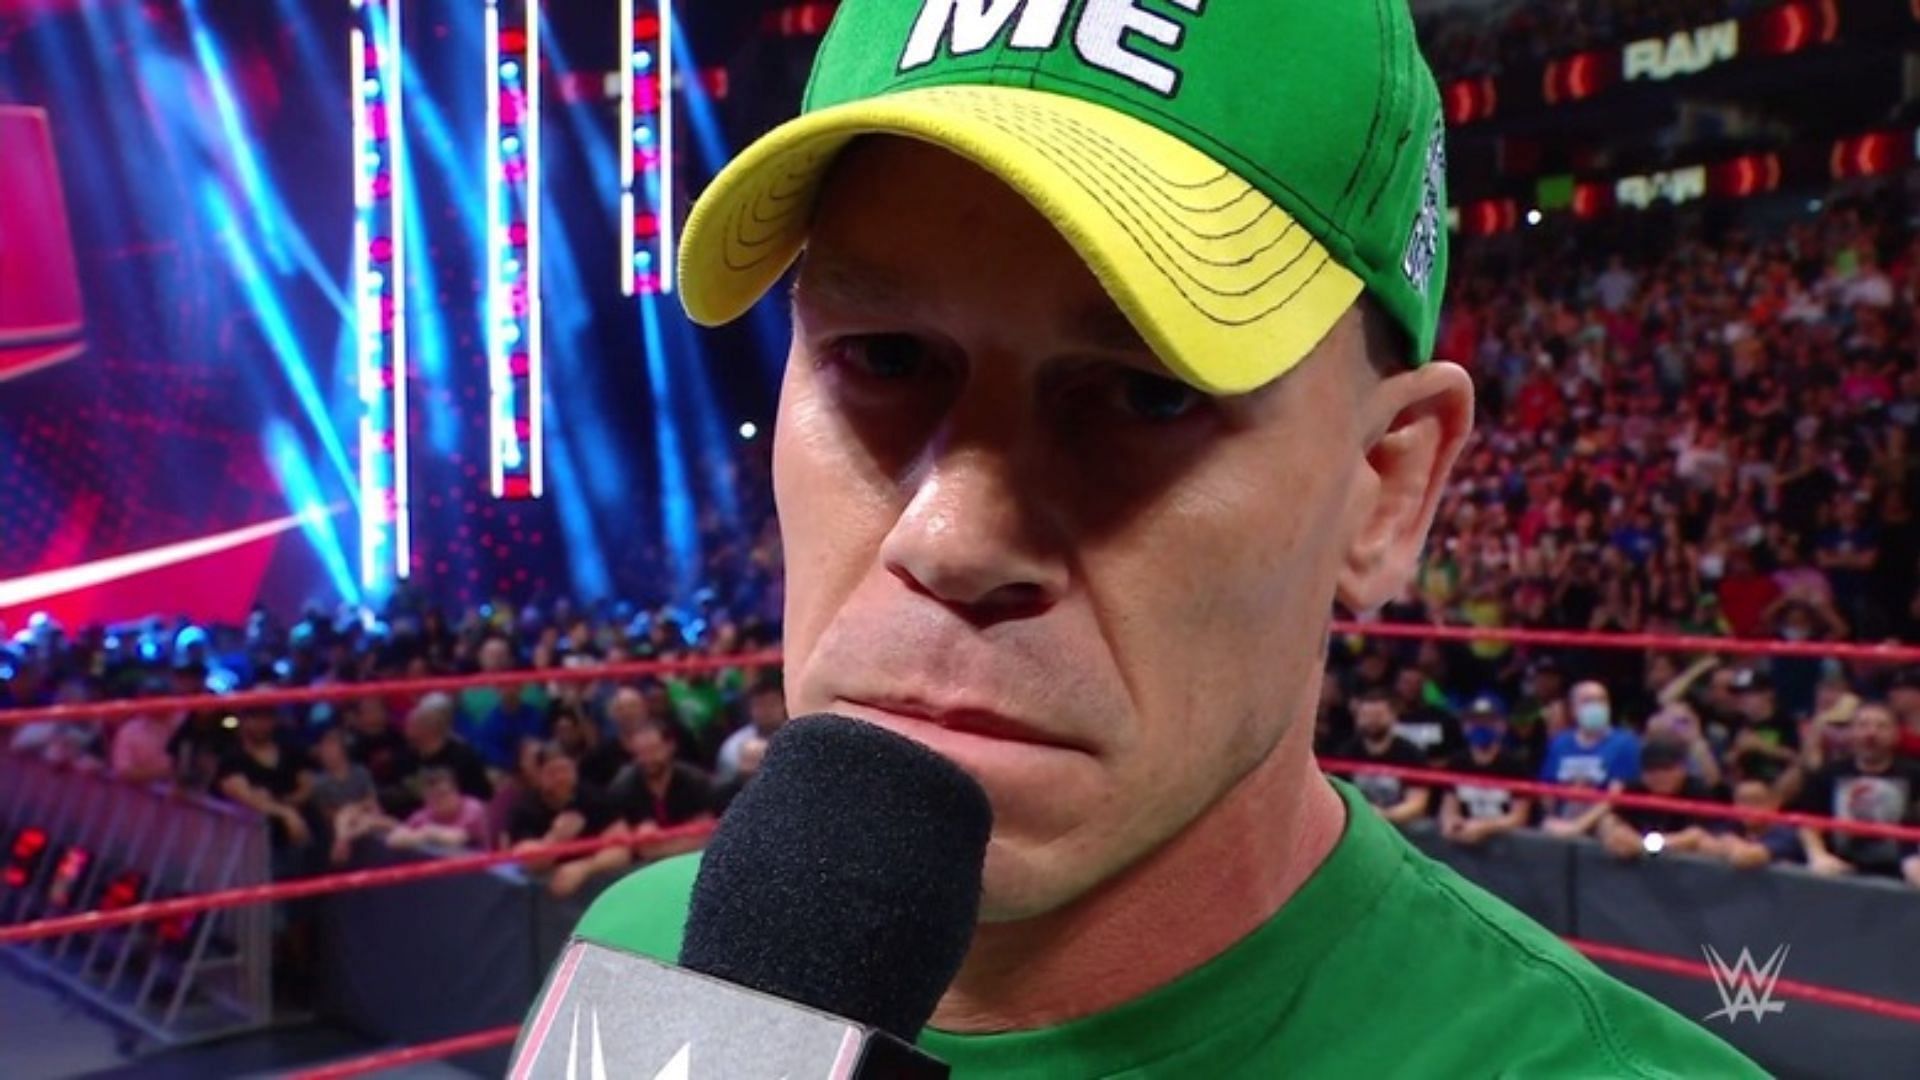 Will John Cena issue a challenge to current WWE champion?